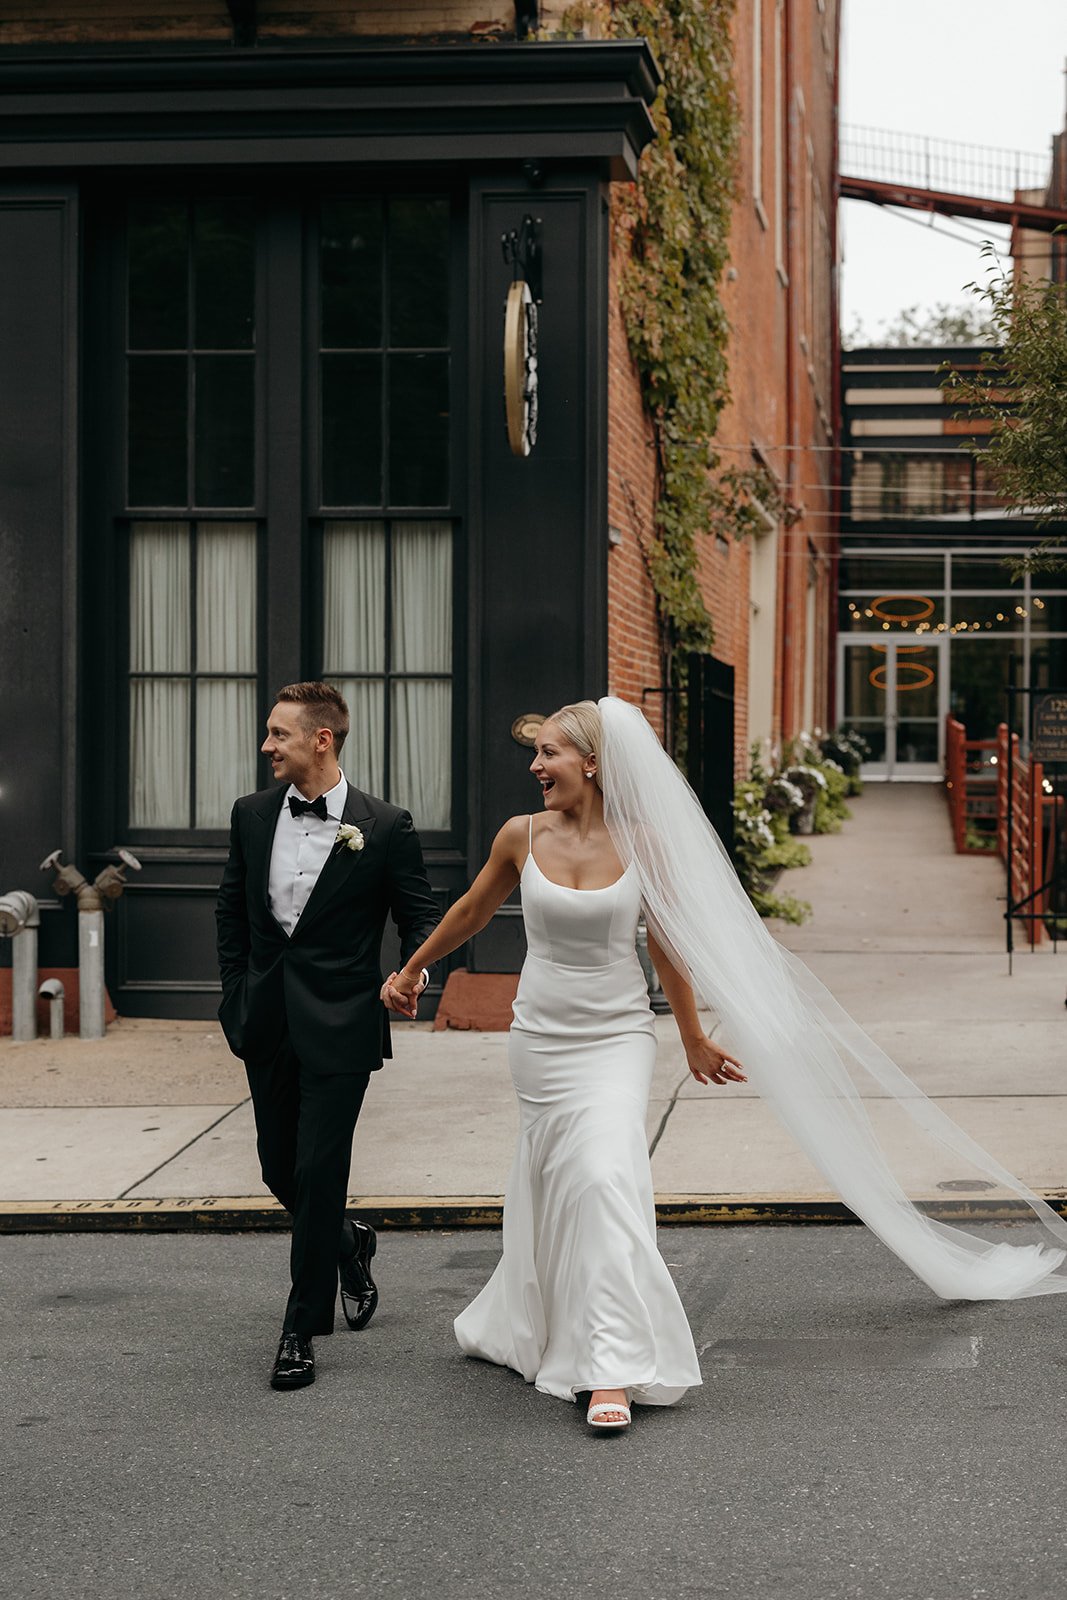 Bride leading groom across street in front of Excelsior lancaster pa